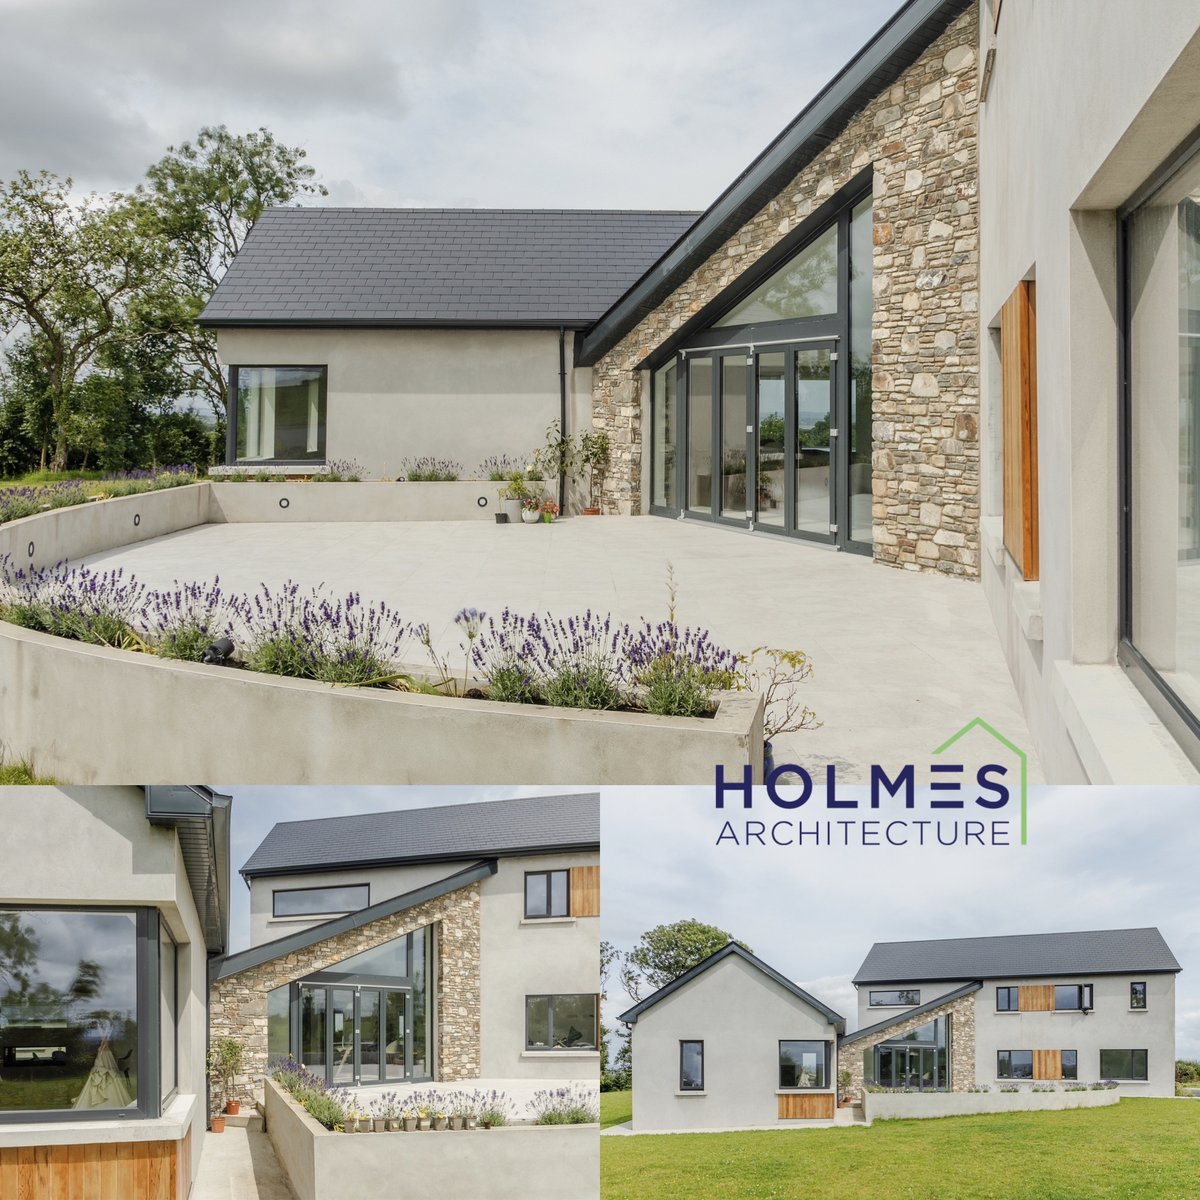 Our recently completed Co Limerick house overlooking the Shannon Estuary is wrapped around a south-facing patio, capturing the warmth of the sun for energy-efficient design #housedesign #architecture #irishhomes #familyhome #stonecladding #patio